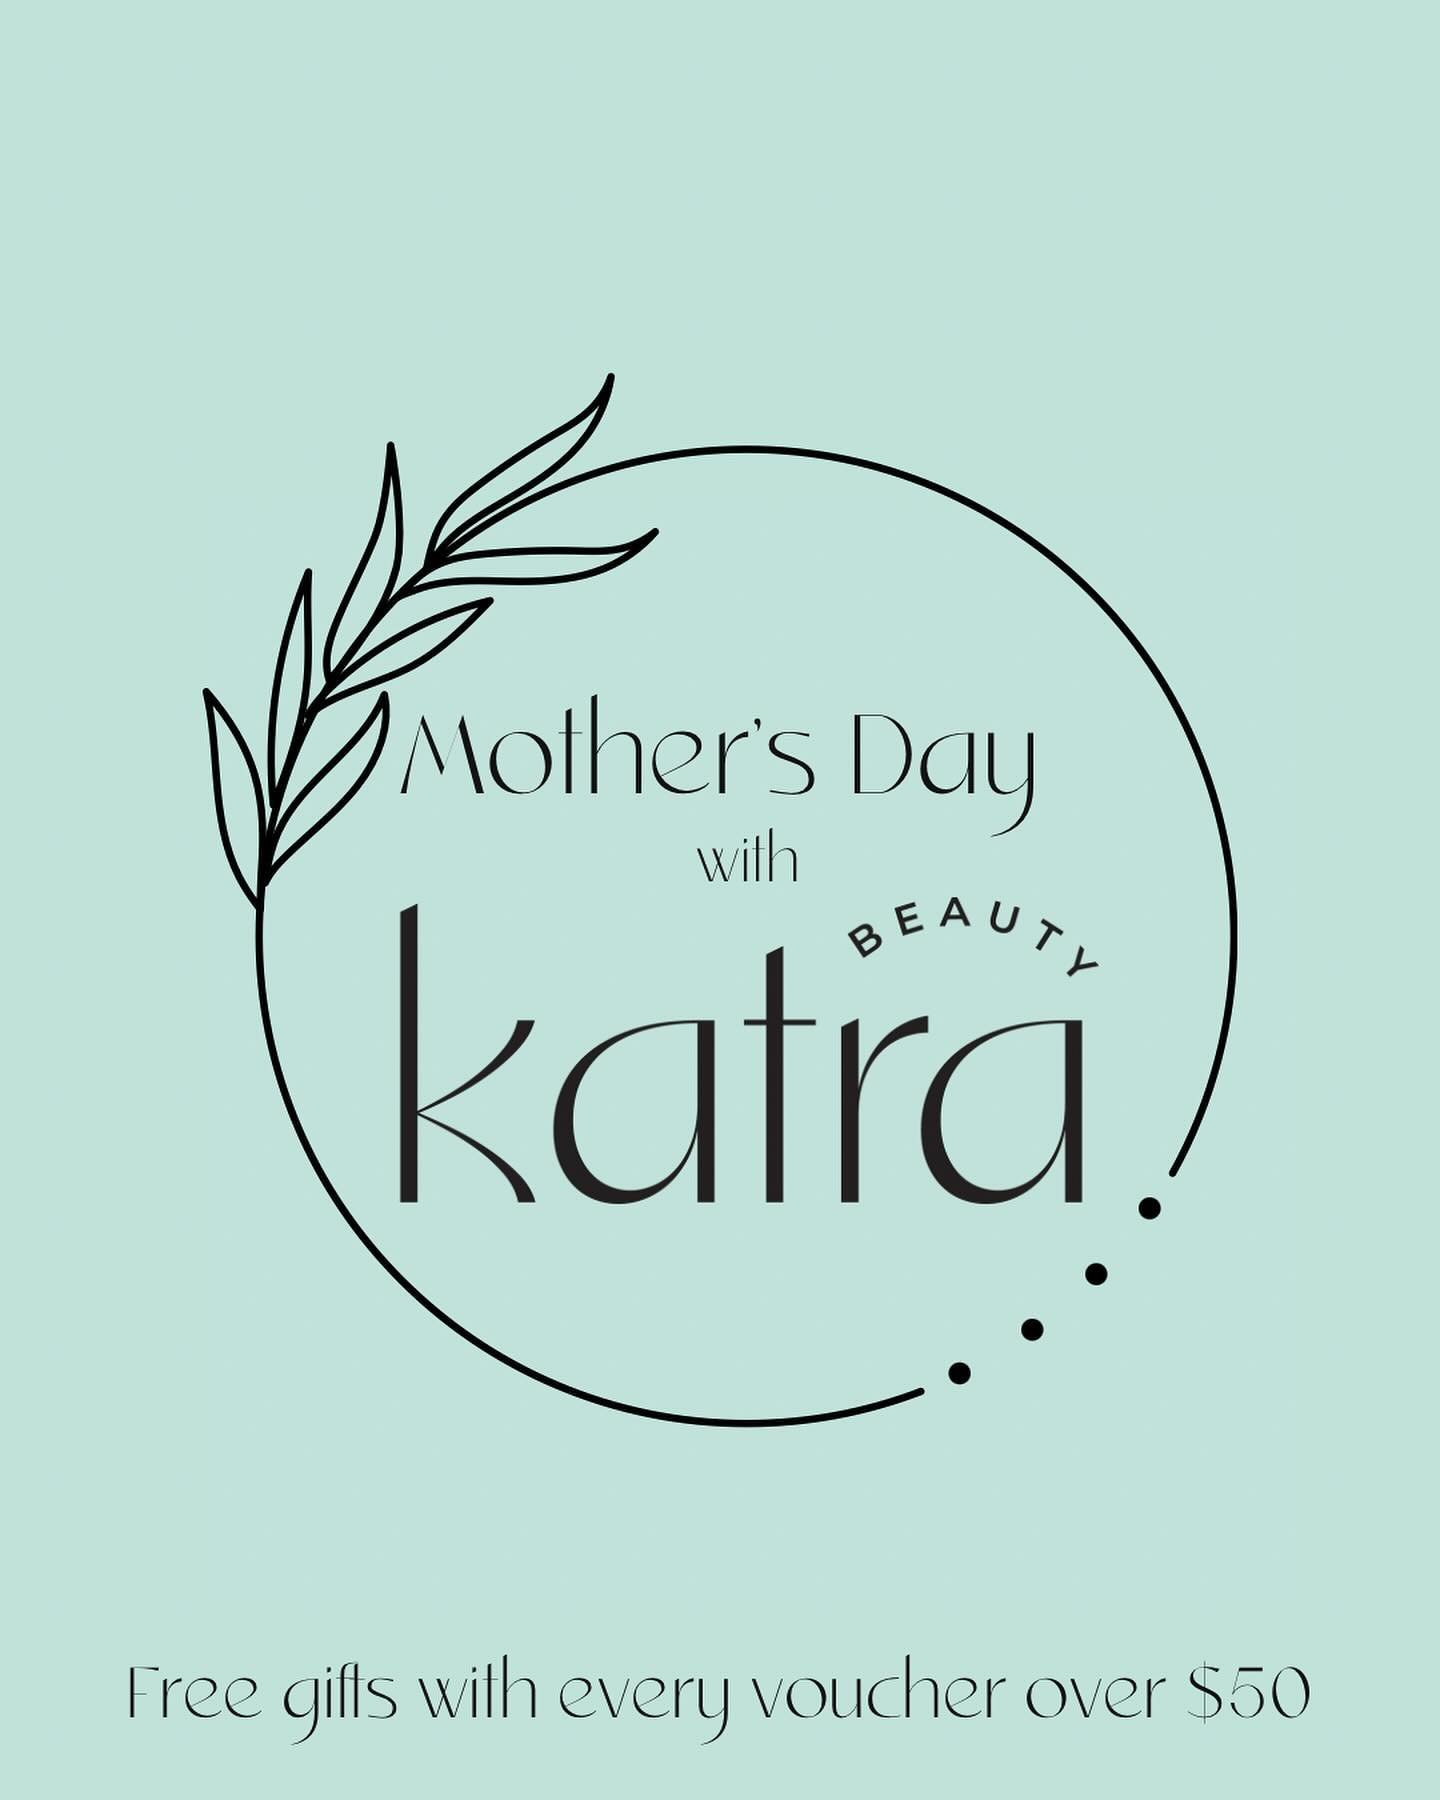 Gift ideas to spoil that special someone  this Mother&rsquo;s Day and so much more available in-store. Choose from Makeup, Skincare, Body Butters &amp; Oils, Jewellery &amp; LED at home facial therapy devices. 

To shop online, click on our link in t